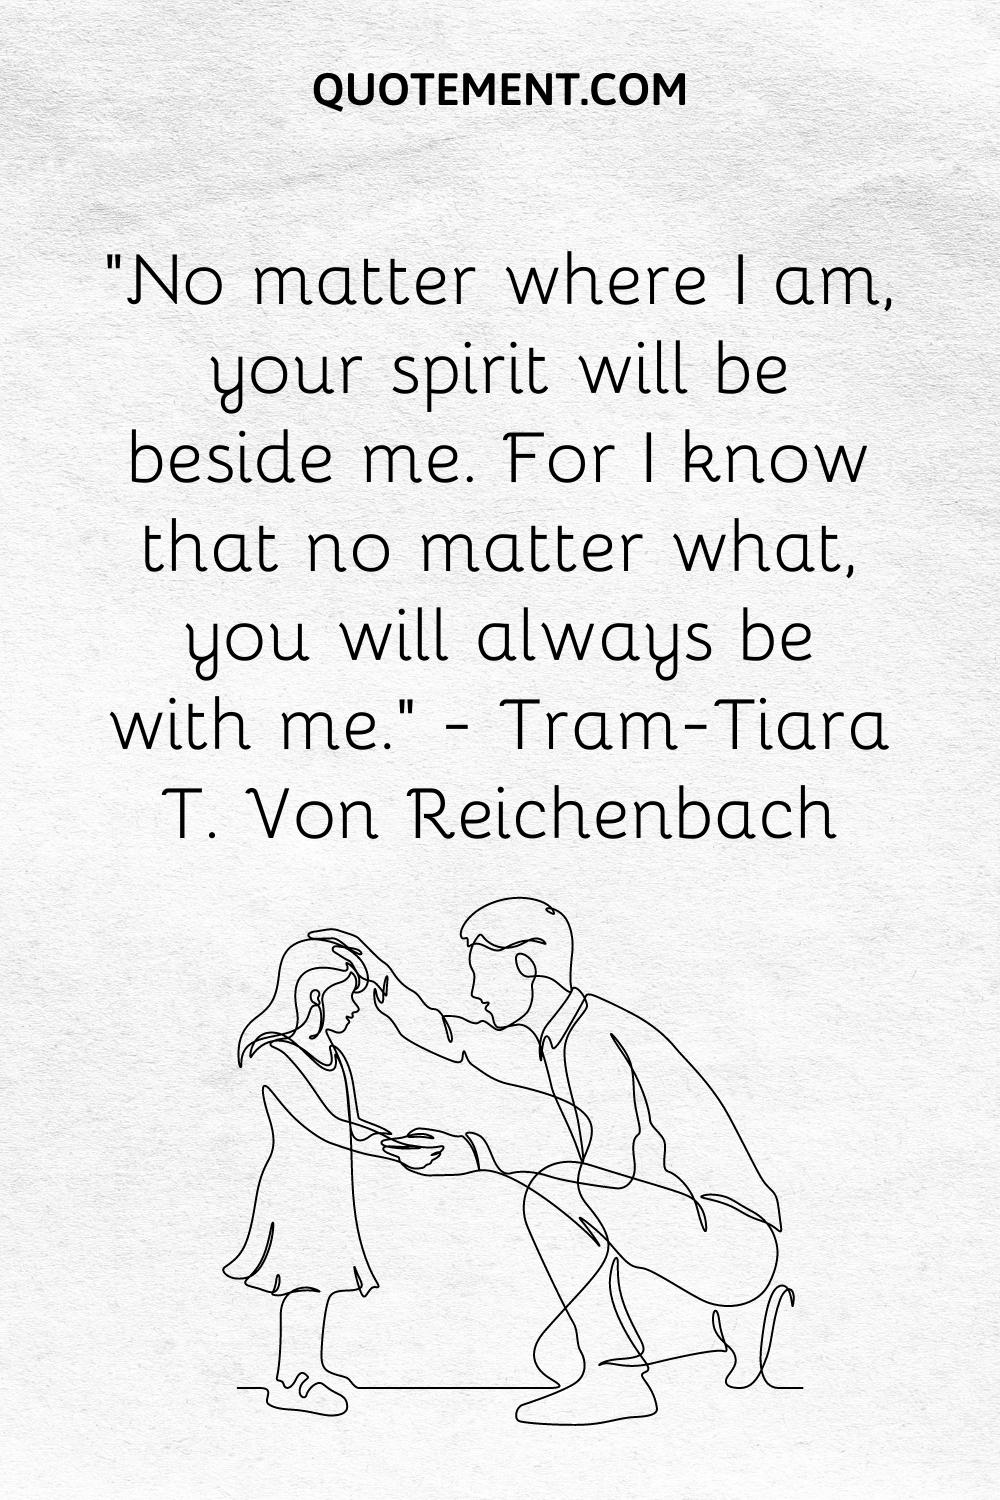 “No matter where I am, your spirit will be beside me. For I know that no matter what, you will always be with me.” — Tram-Tiara T. Von Reichenbach